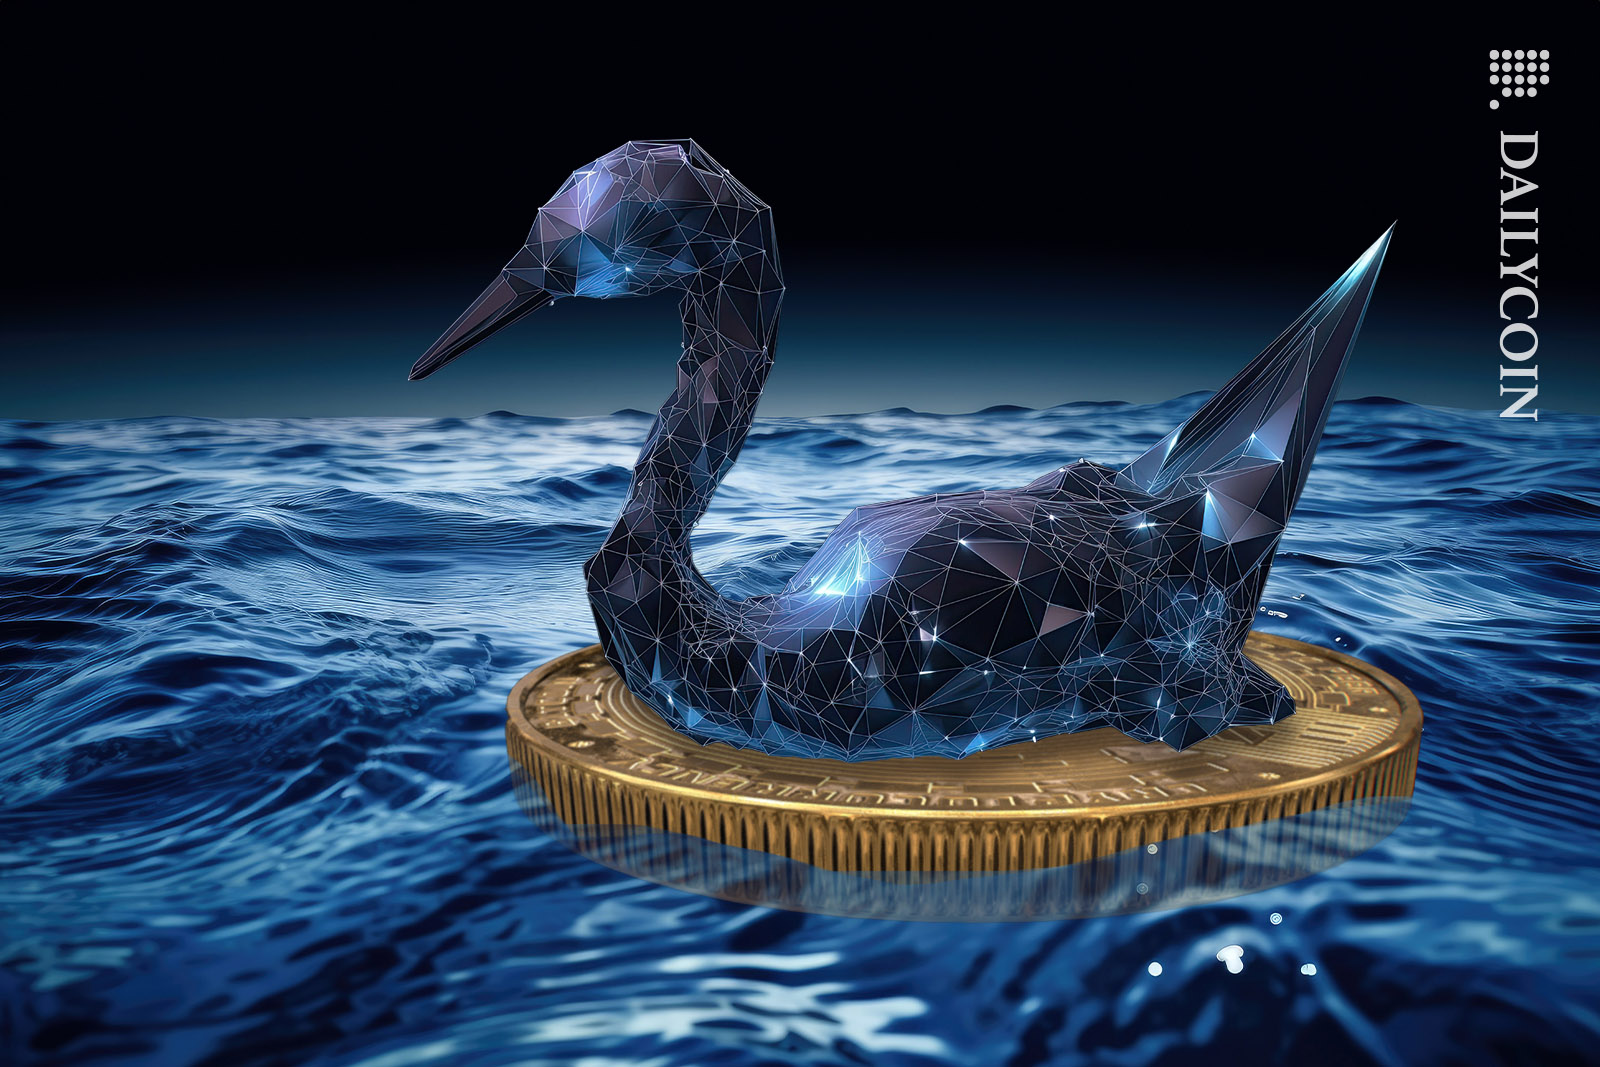 A digital bitcoin swan on the way somehwere in the dark waters.